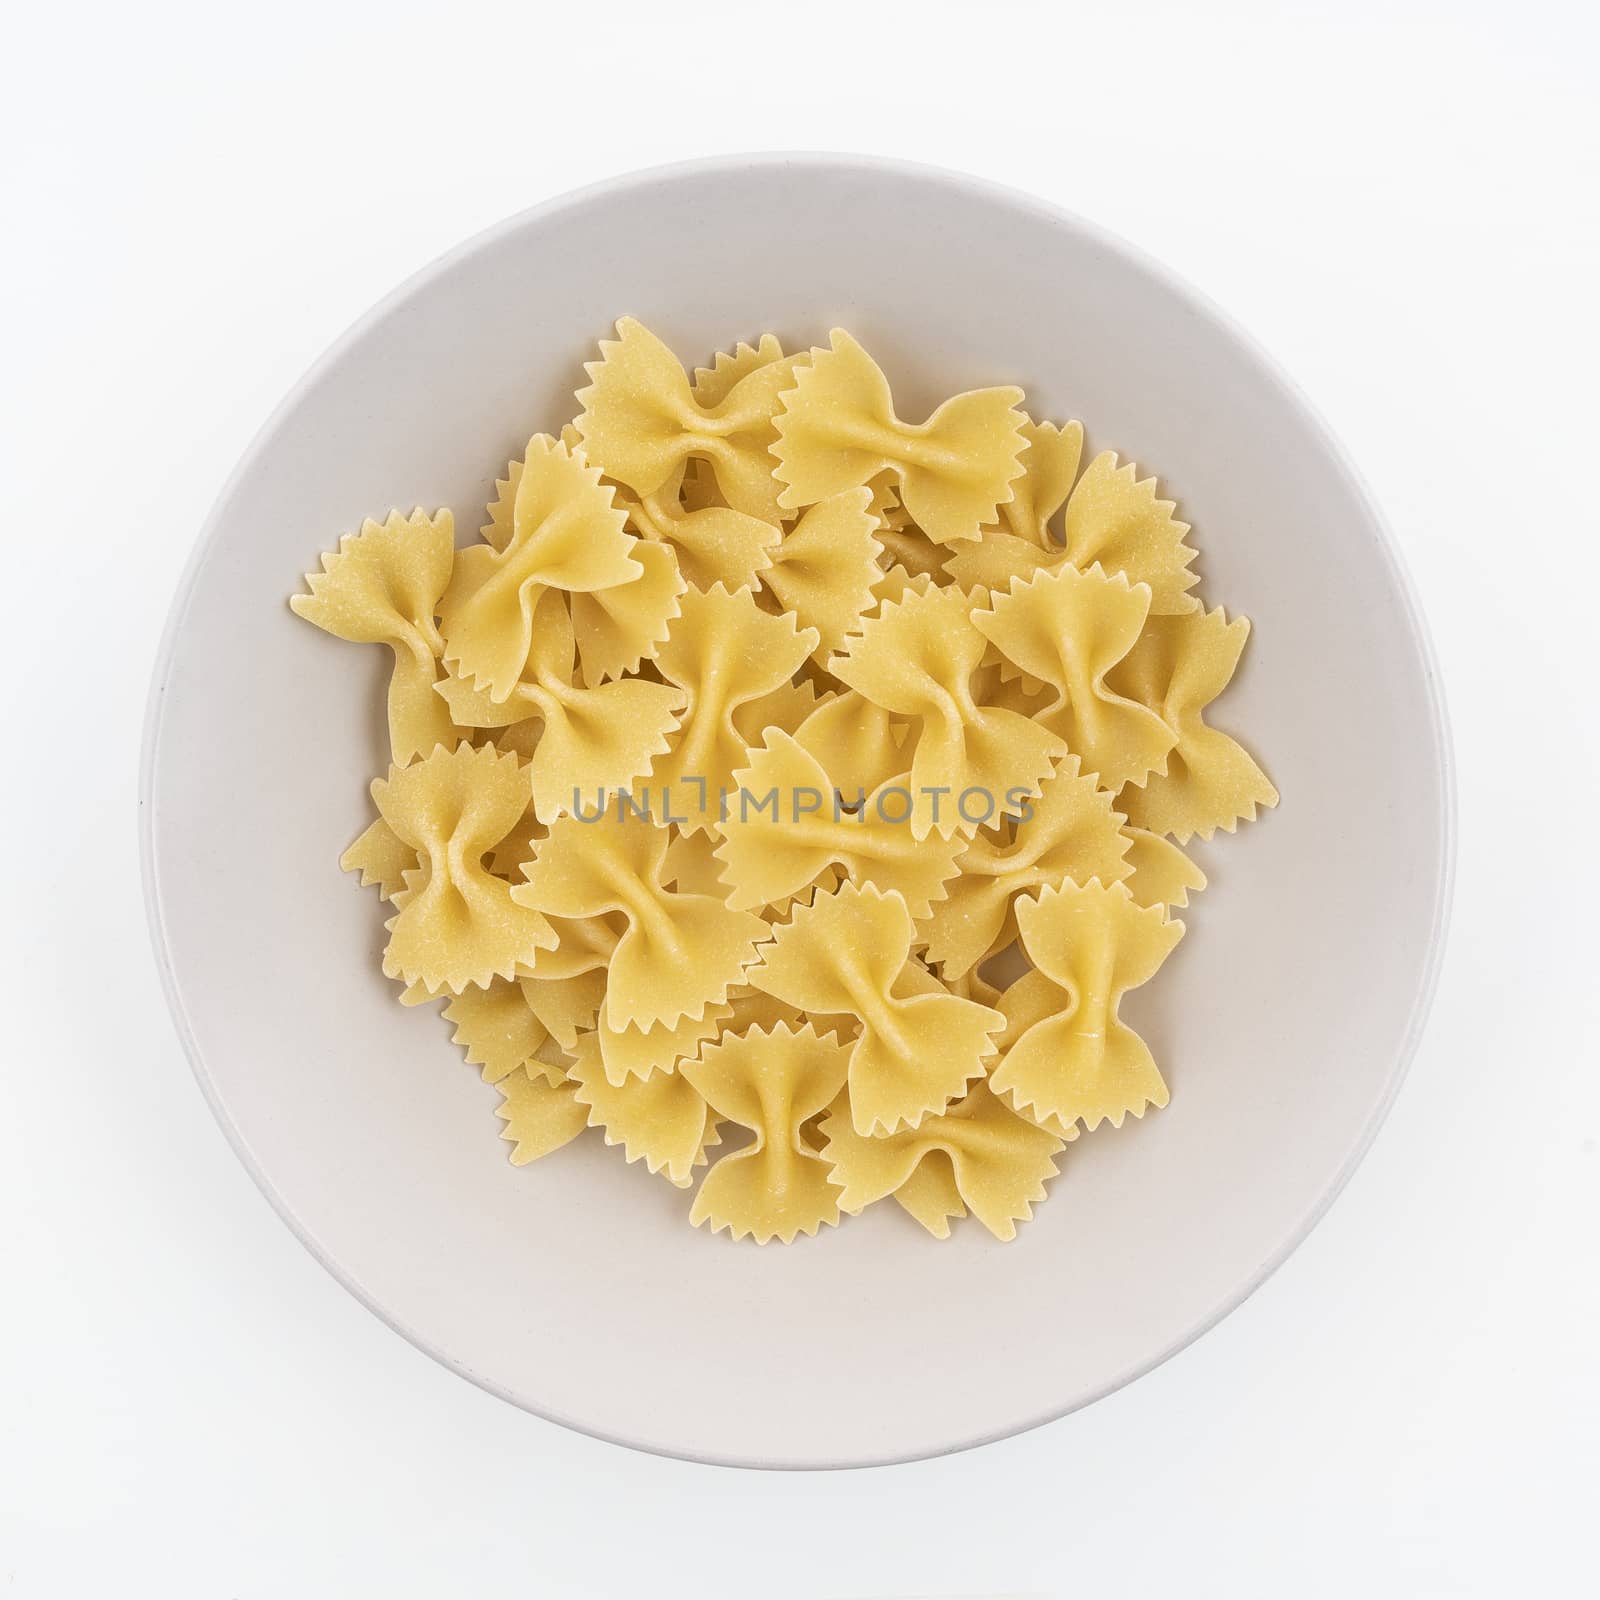 Some dried butterfly format pasta on a plate